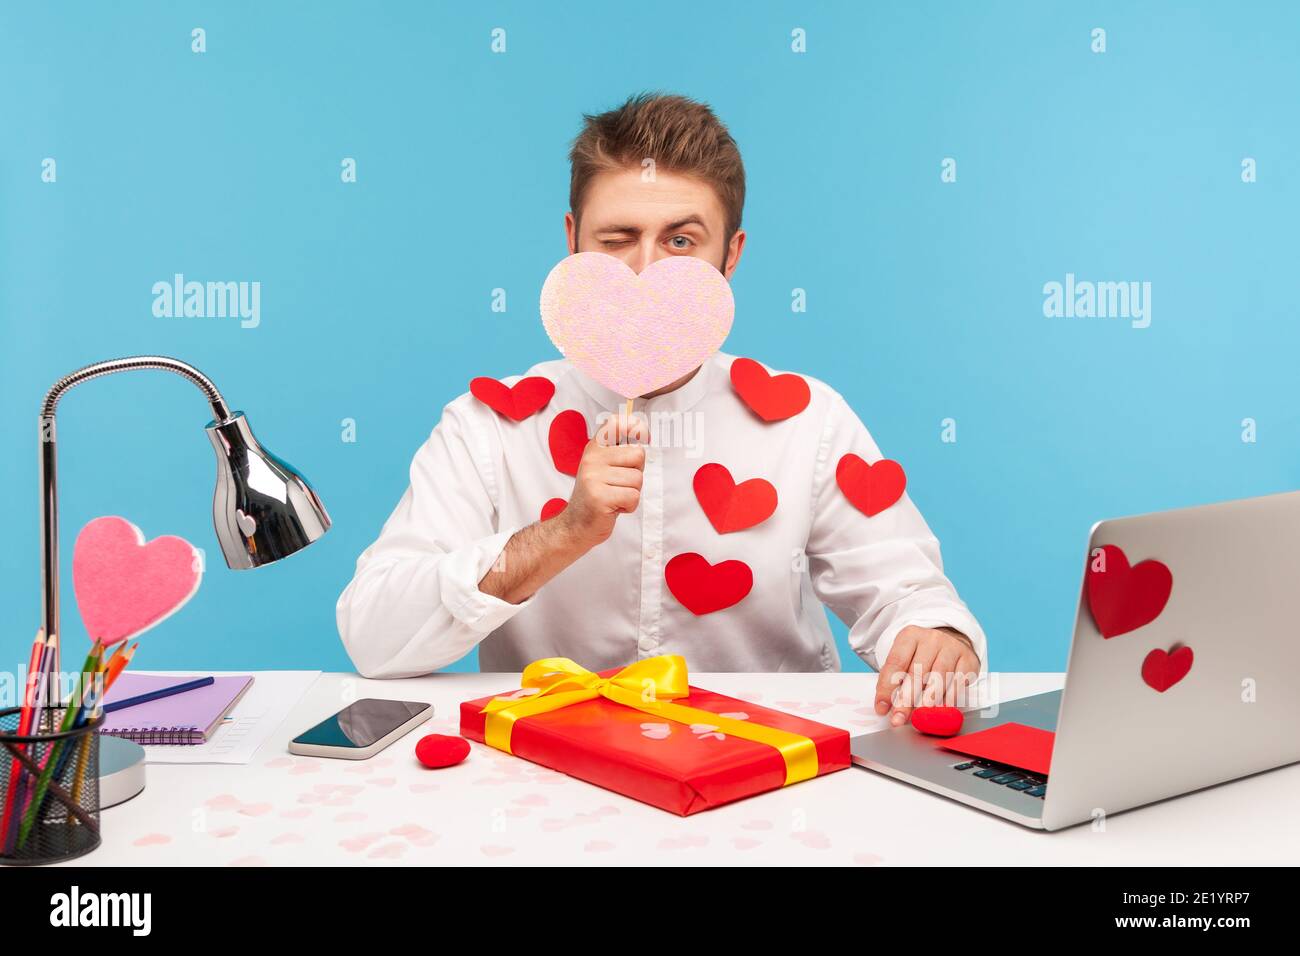 Man office worker in love with hearts on shirt hiding face behind pink heart and winking, preparing gift for valentines day, celebration, romance. Ind Stock Photo